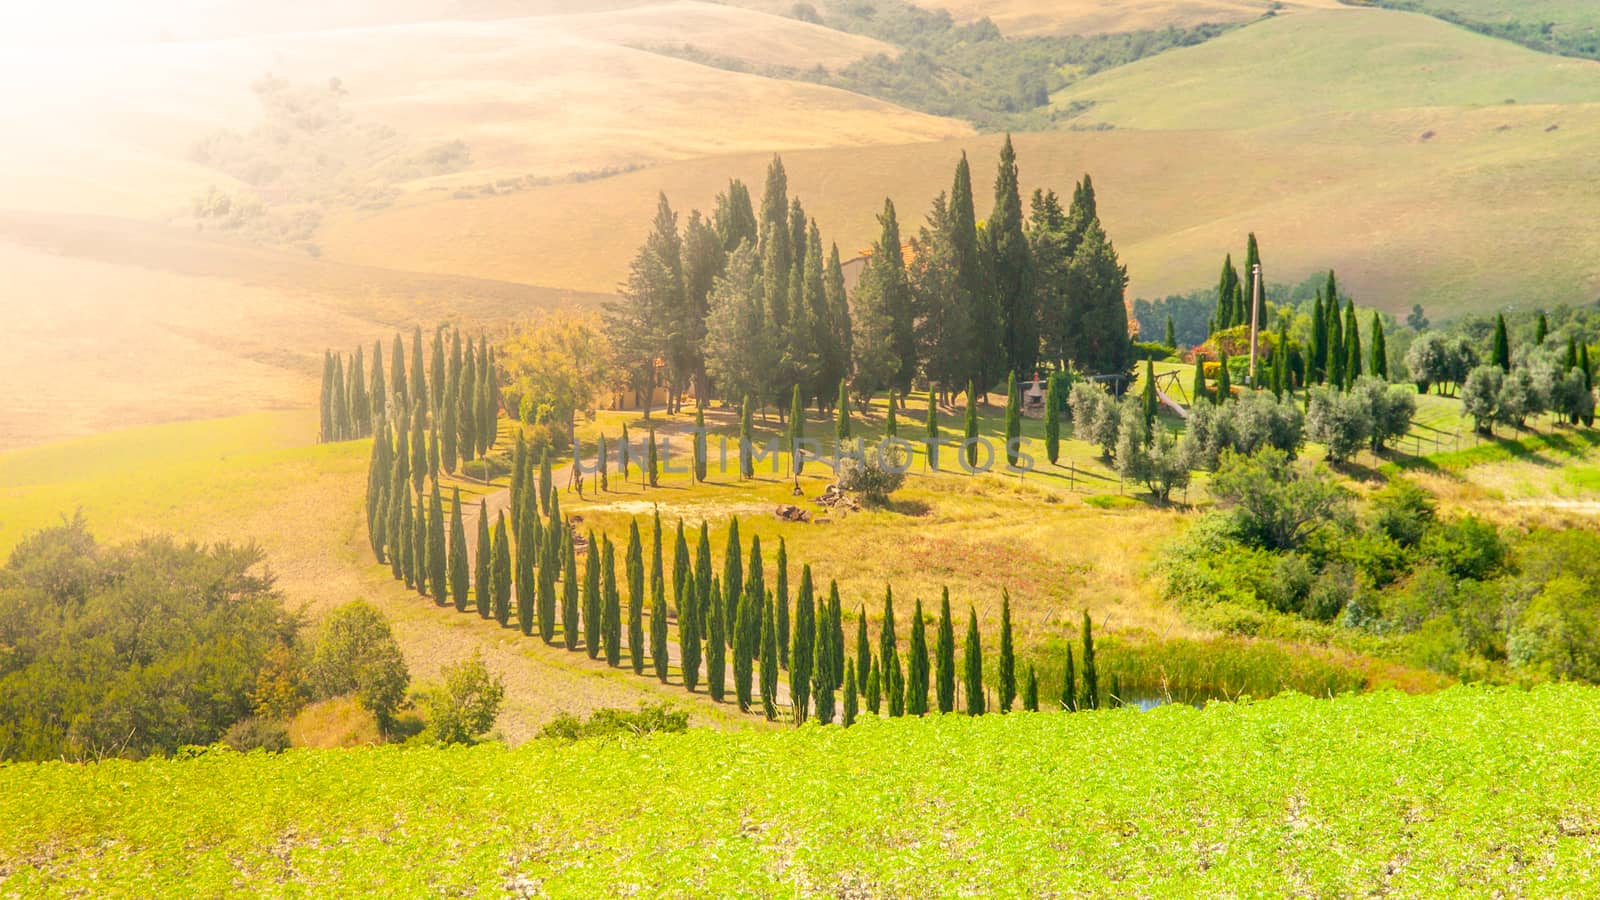 Evening in Tuscany. Hilly Tuscan landscape with cypress trees alley and farm house, Italy by pyty